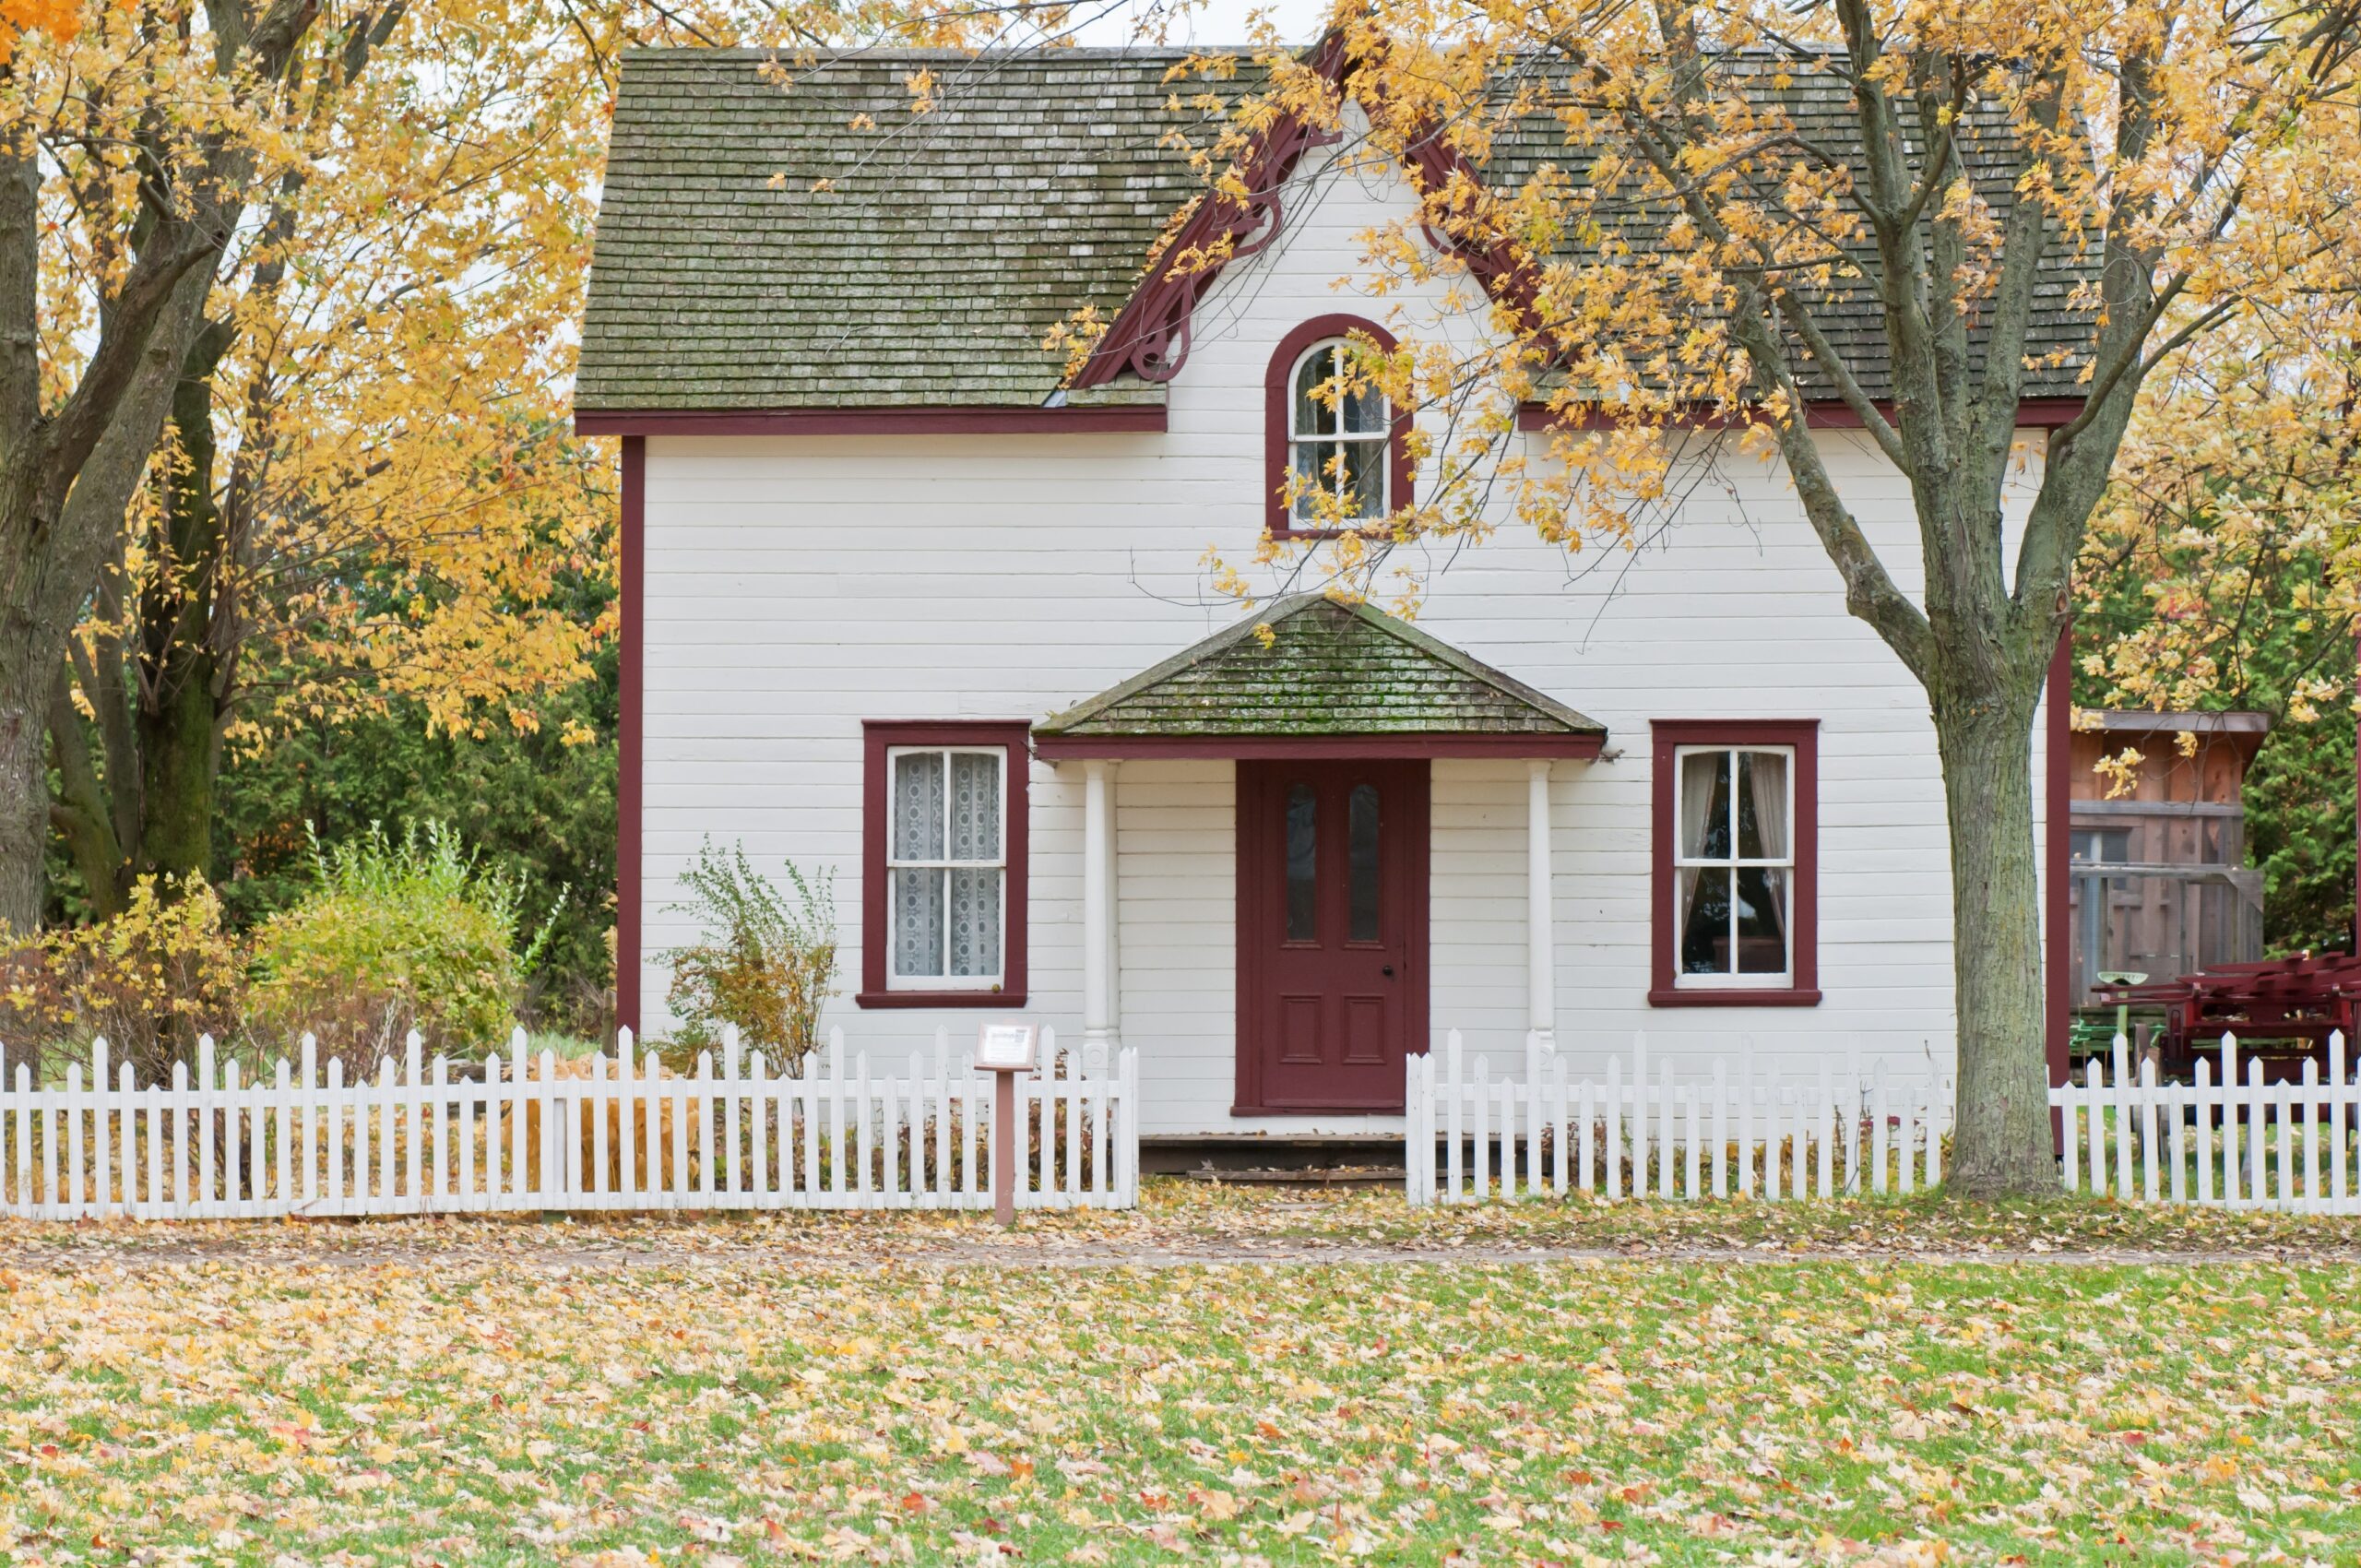 Preparing your home for the fall